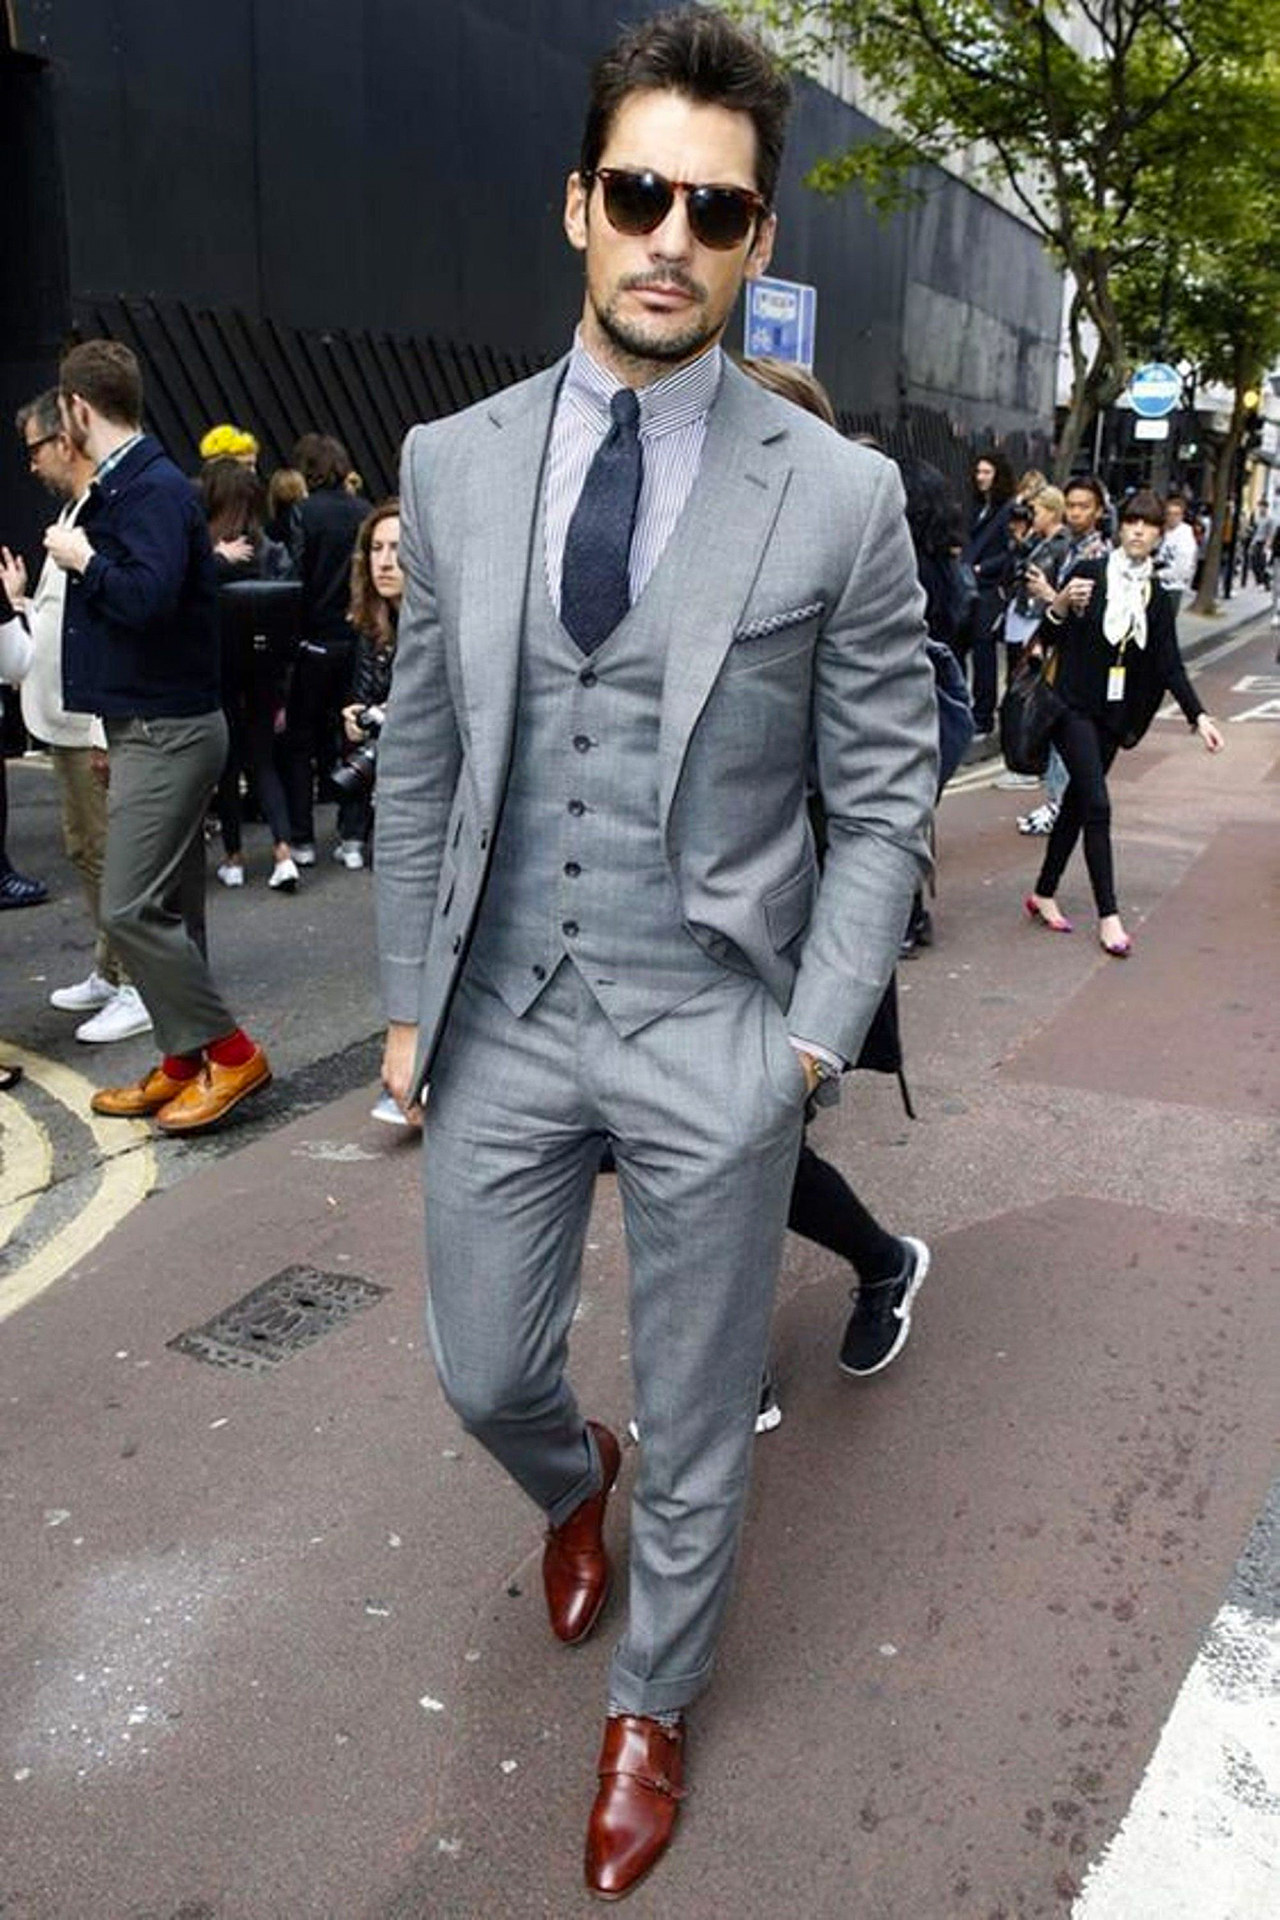 Light grey suit with blue stripe shirt, navy tie and brown shoes color combination